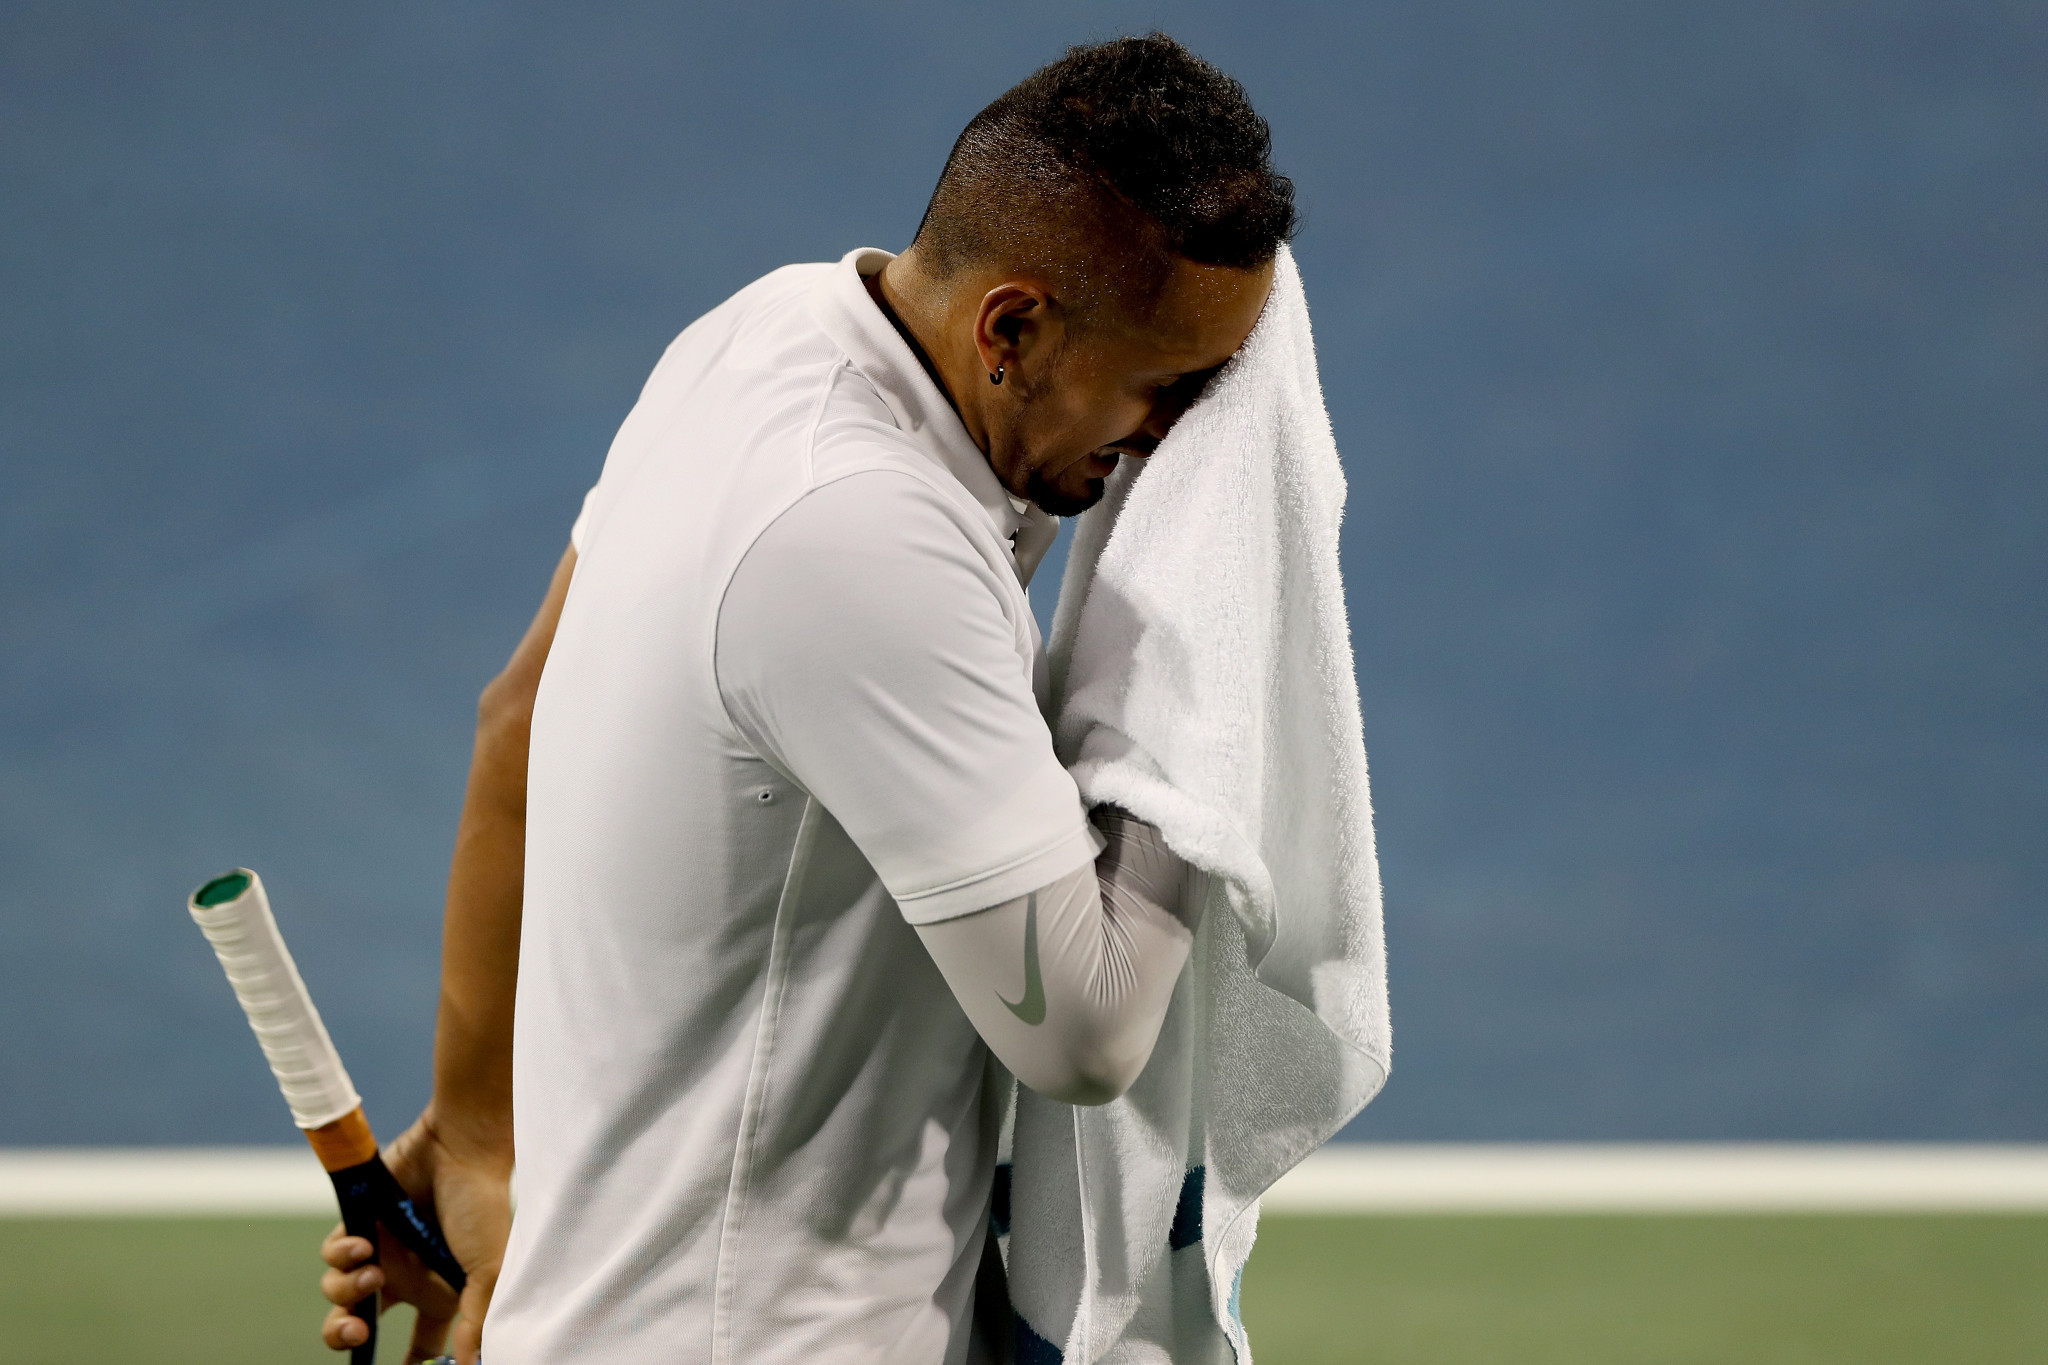 Nick Kyrgios suffered an on-court meltdown at the Cincinnati Masters, receiving a record ATP fine ©Getty Images